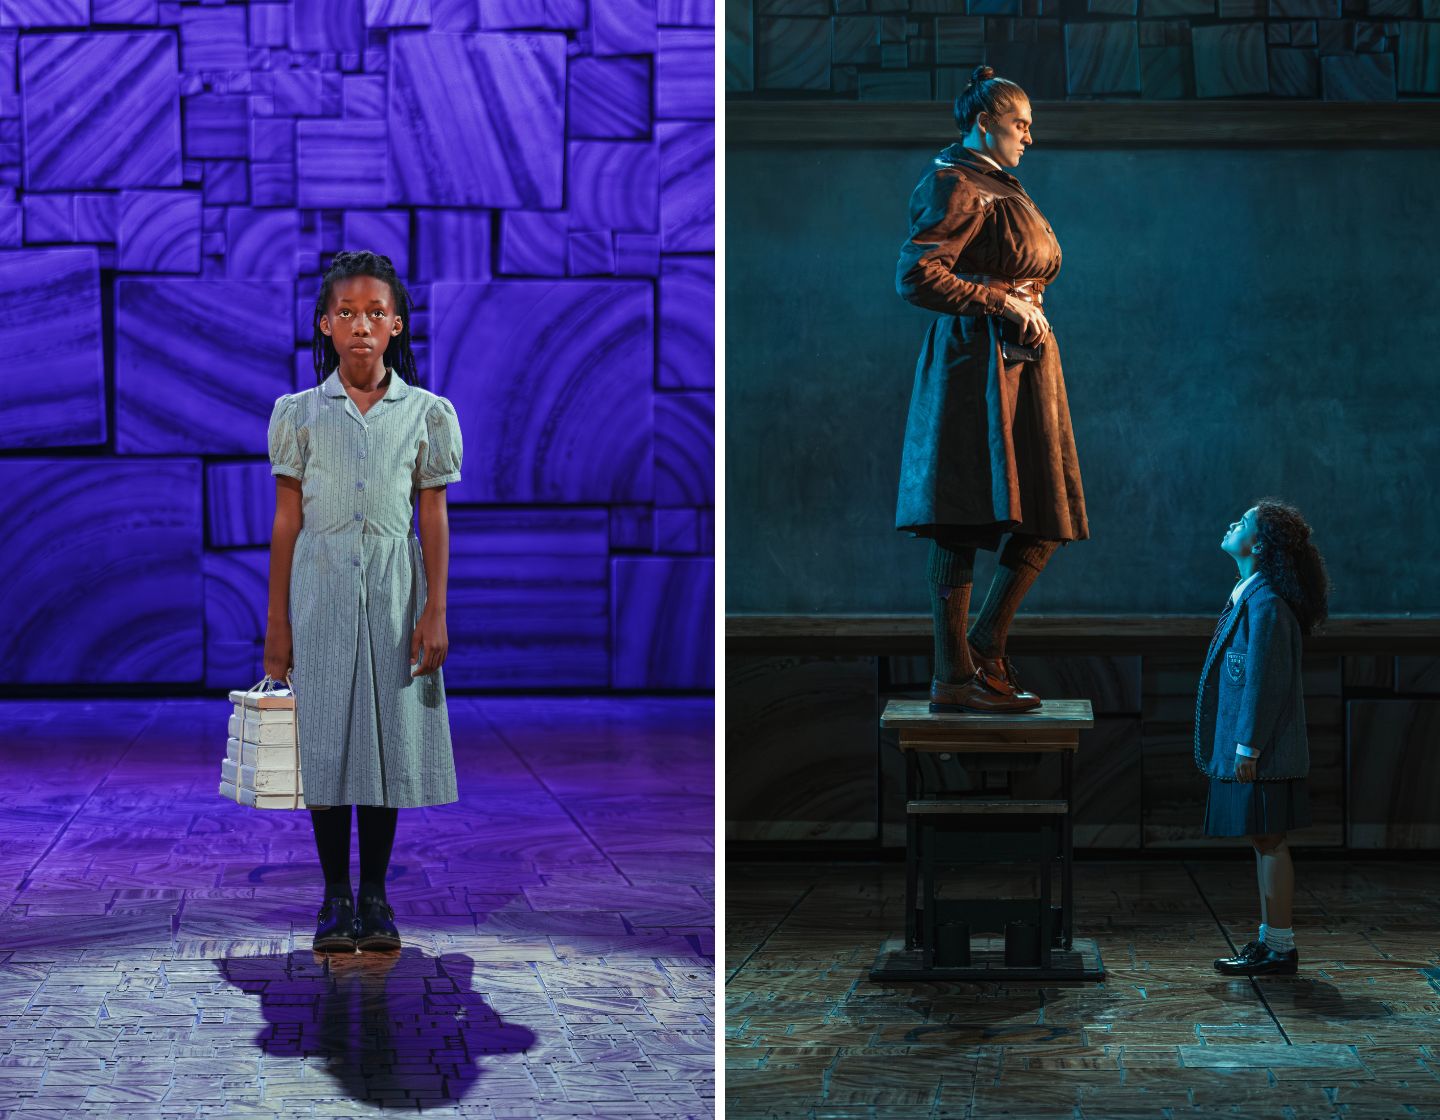 We Chat With the 3 Kids Who Star as Matilda in ‘Matilda: The Musical’